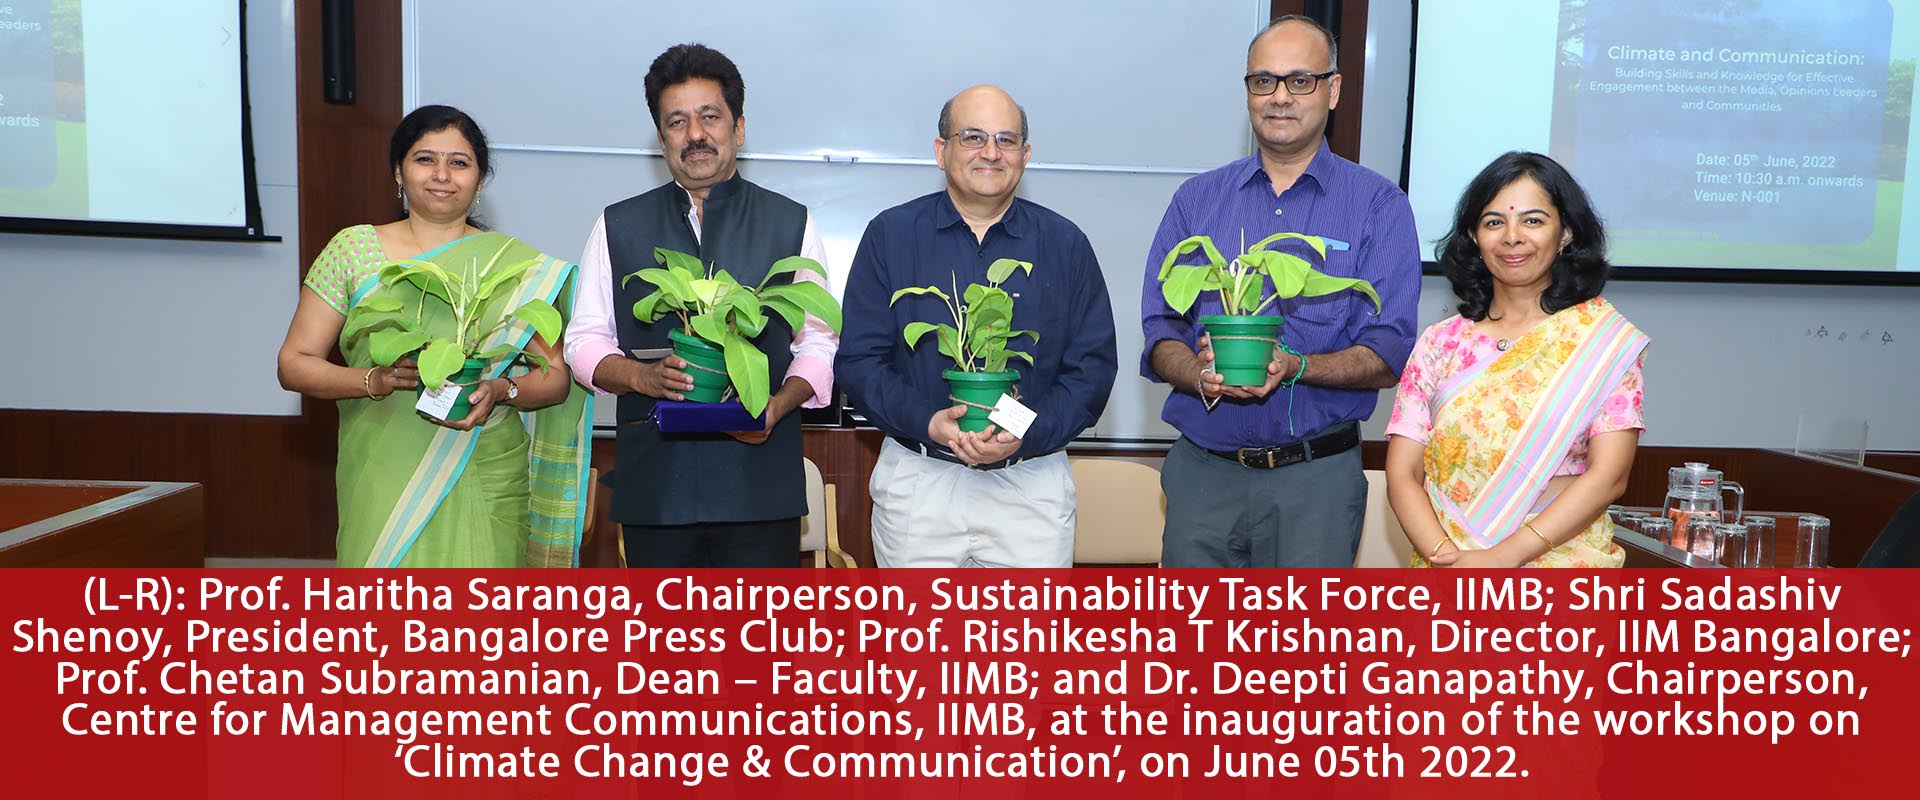 Centre for Management Communication at IIMB hosts a workshop on 5th June for media persons covering climate change